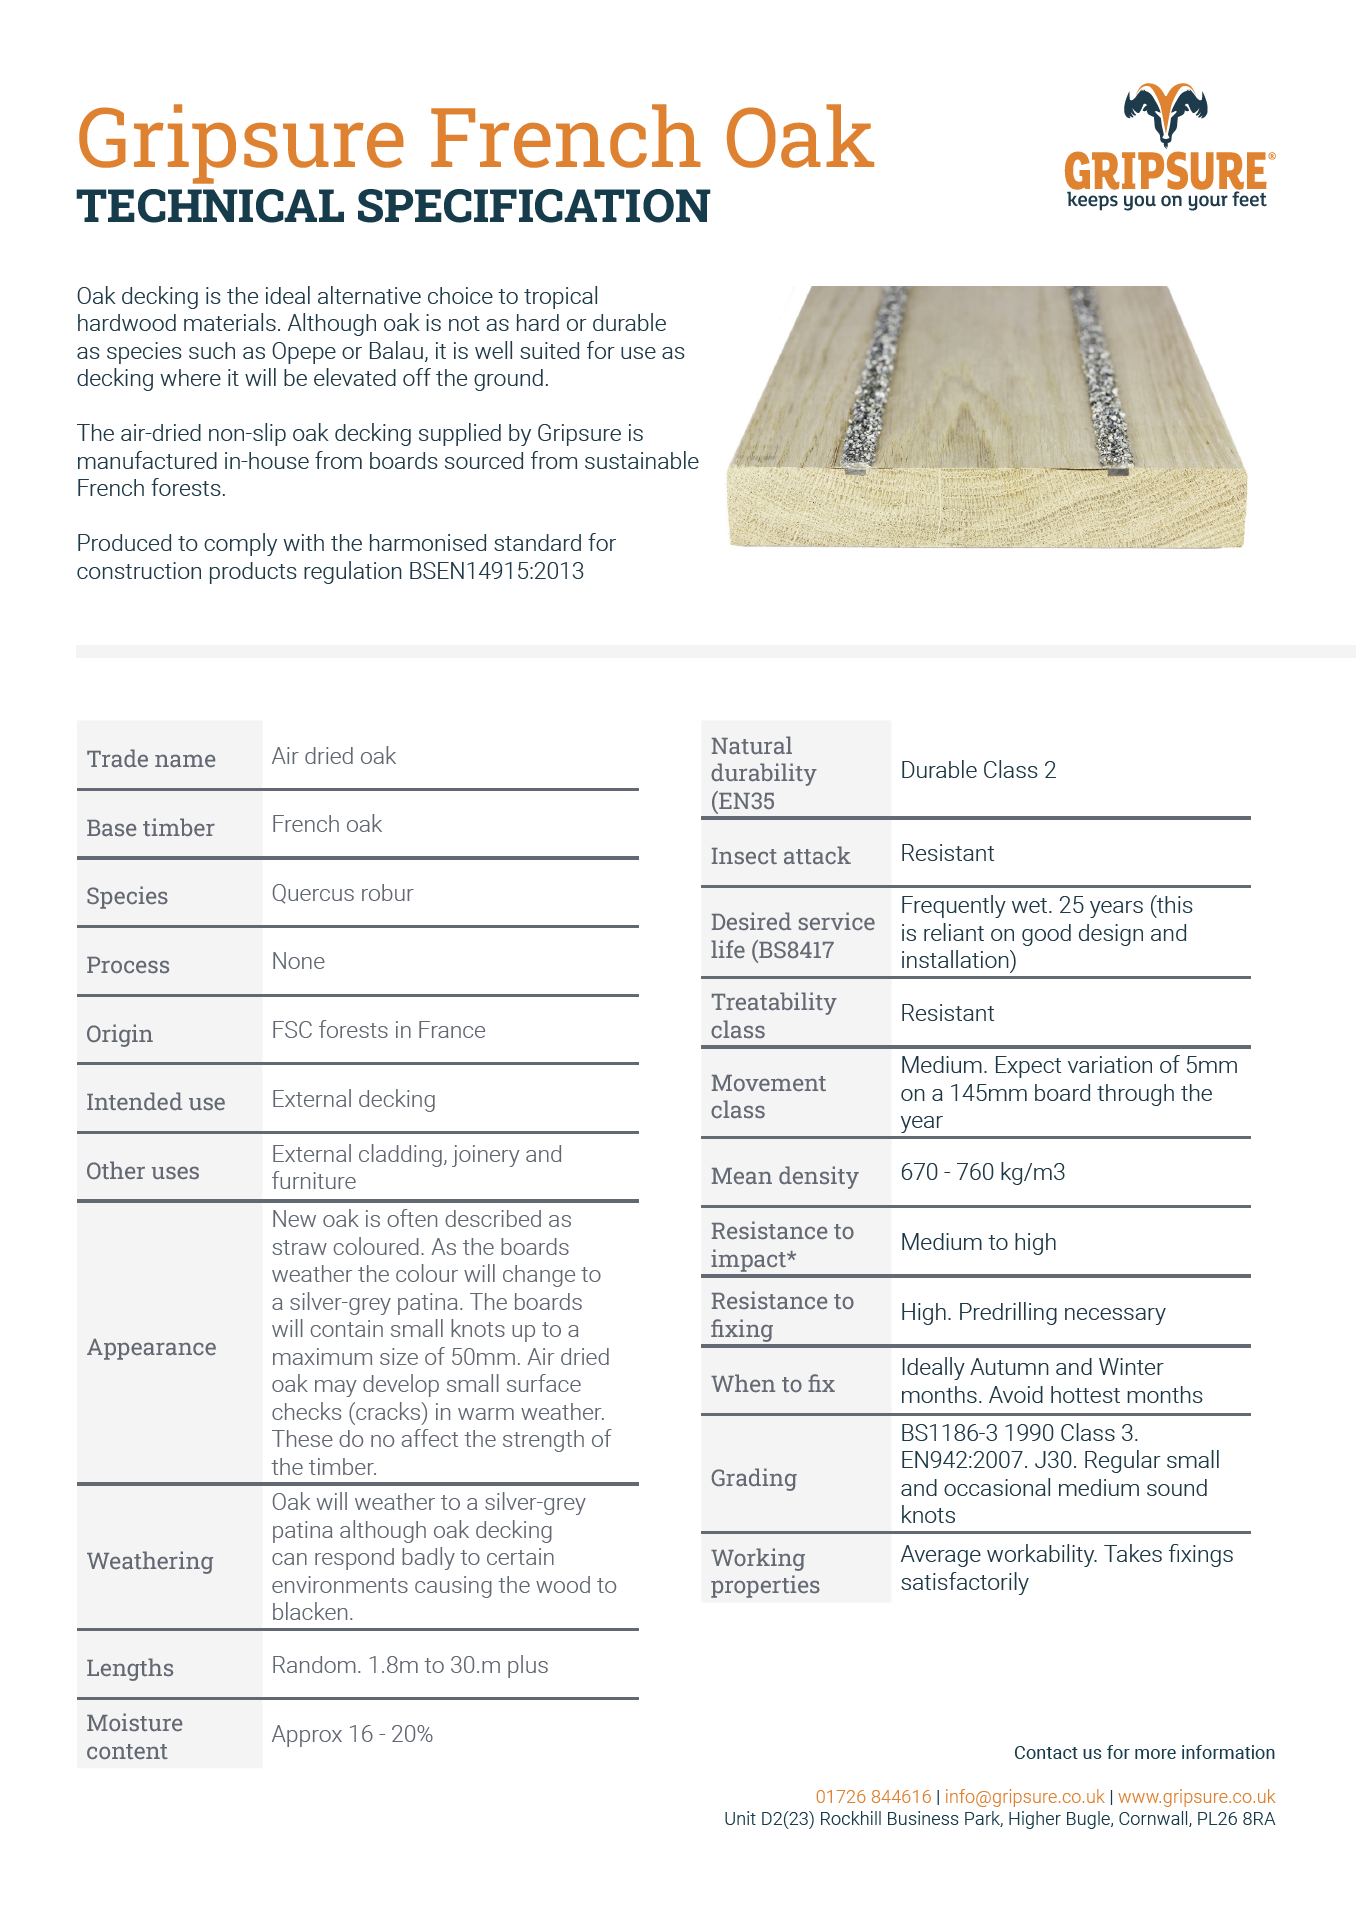 Gripsure French Oak Technical Specification